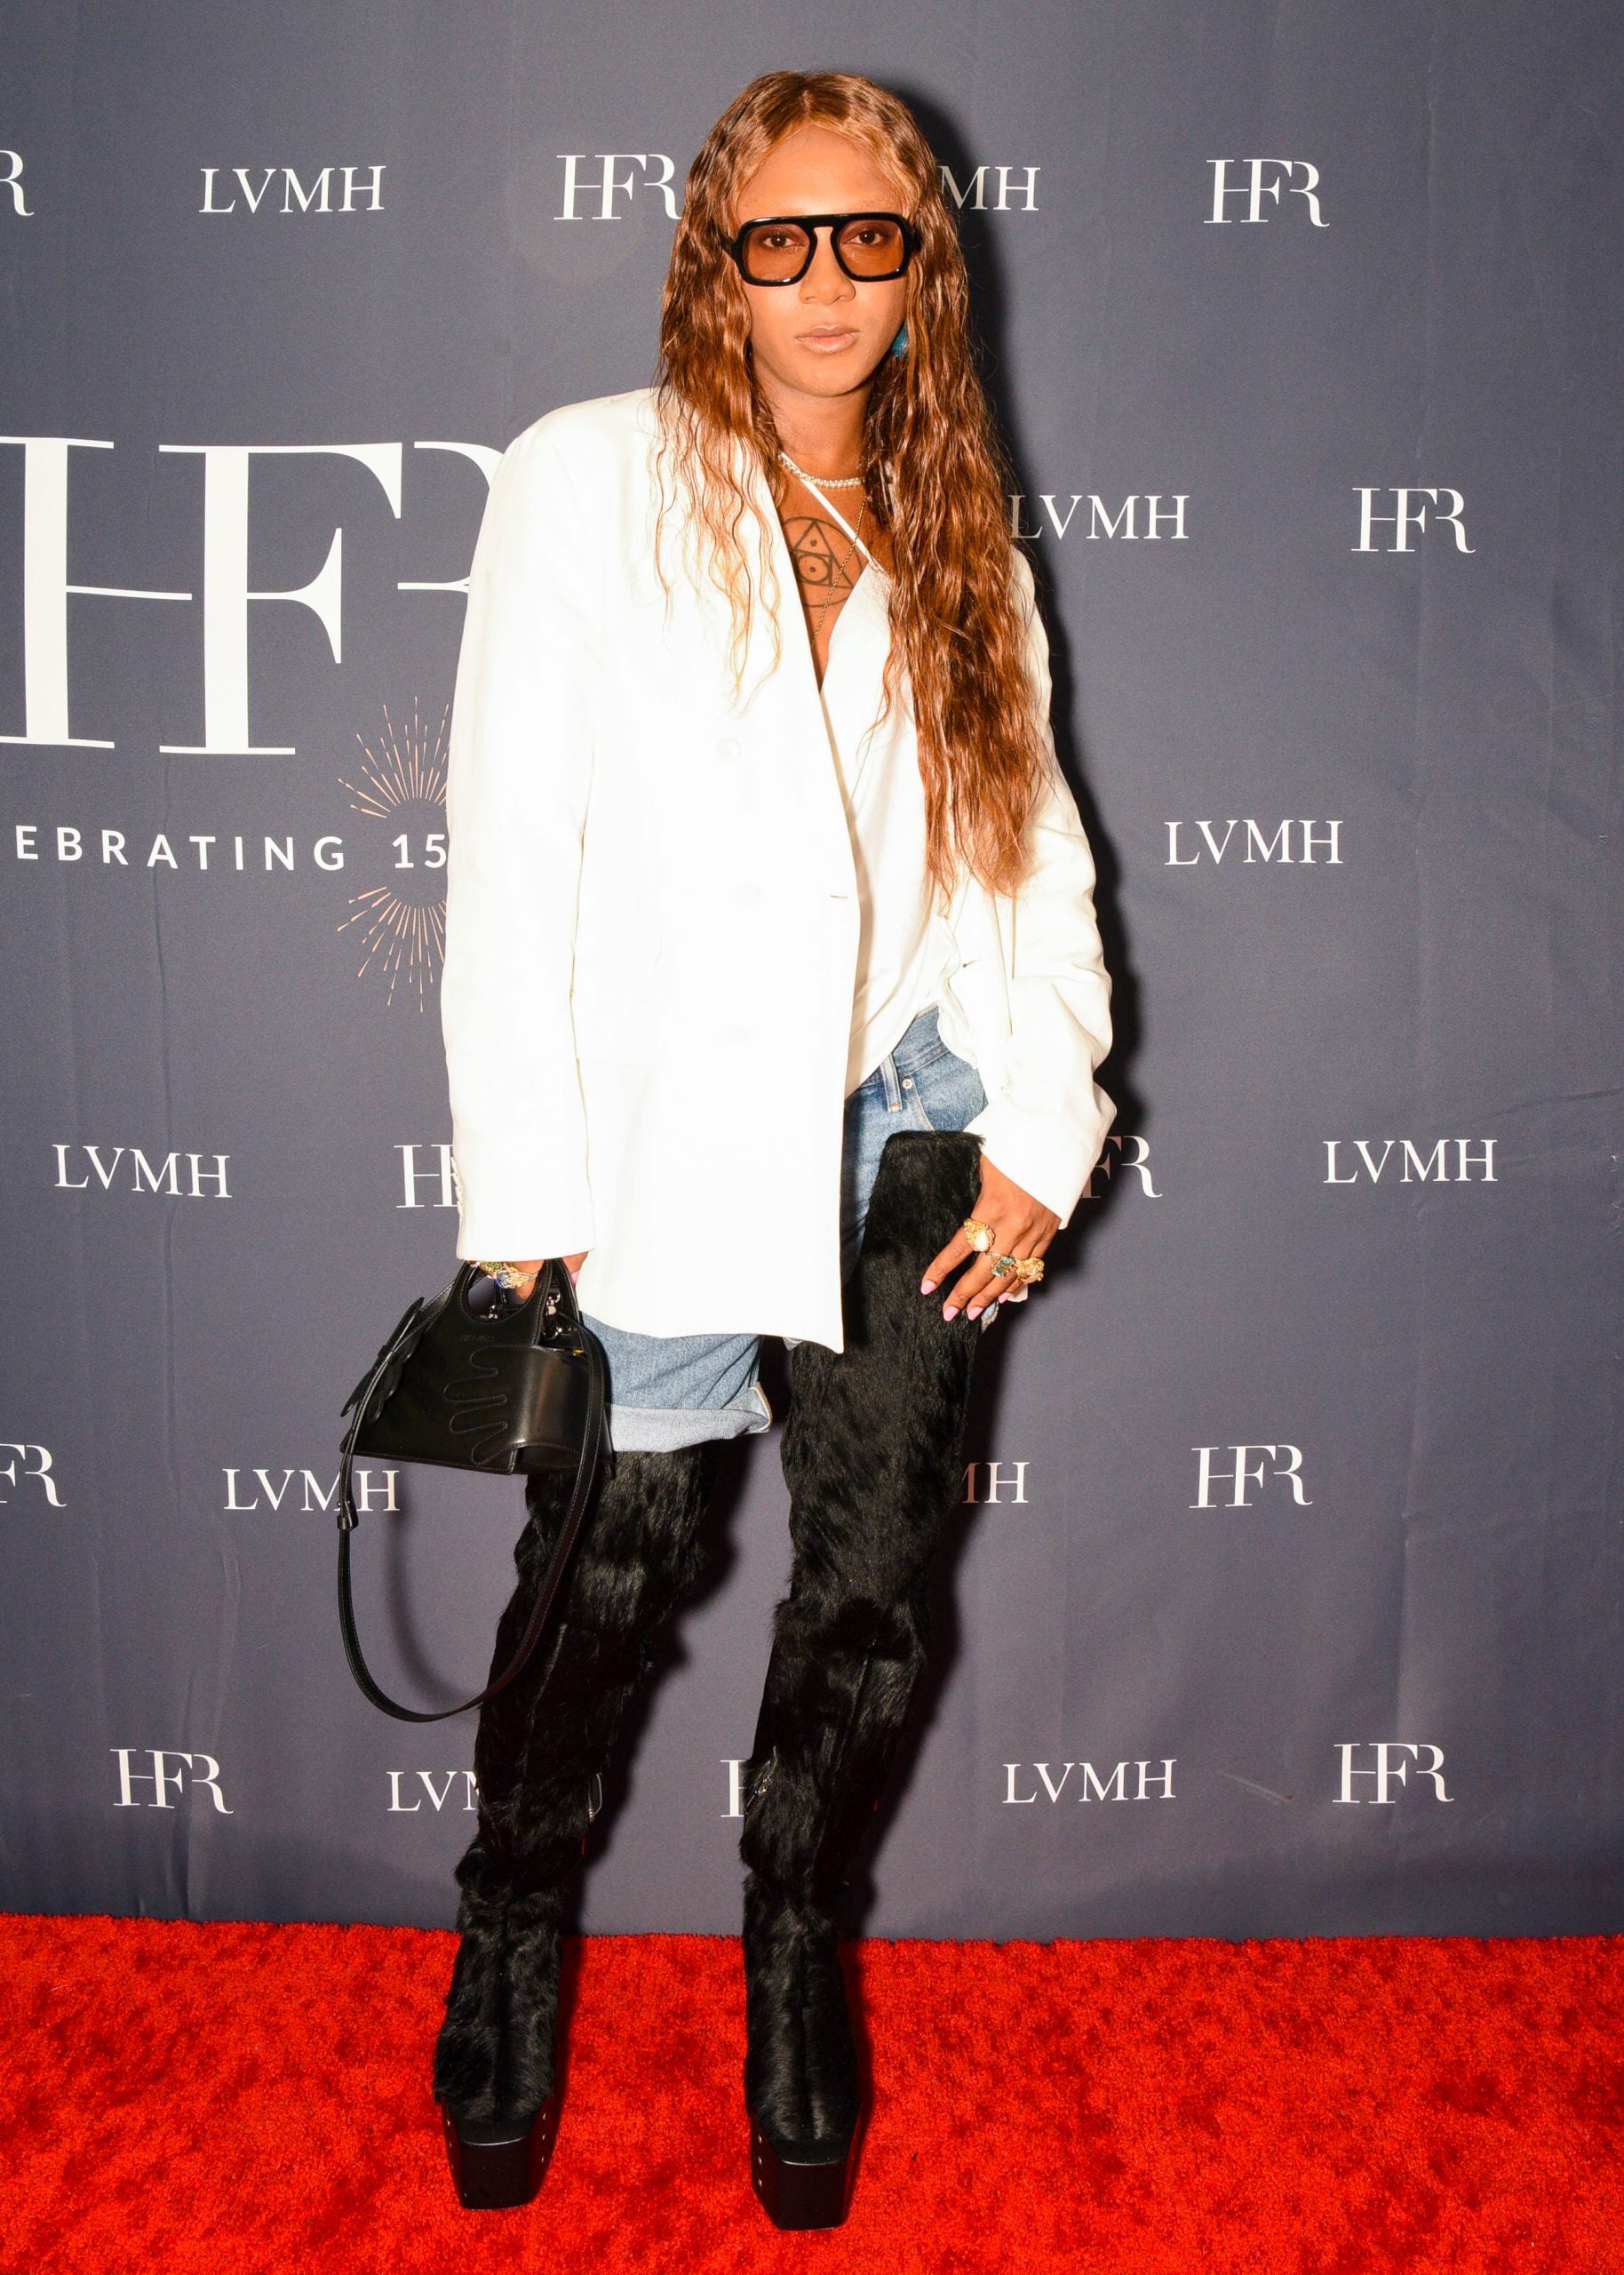 Cotte D'Armes at Harlem's Fashion Row Event, Issa Rae and Janet Jackson  Wowed at Harlem's Fashion Row Event